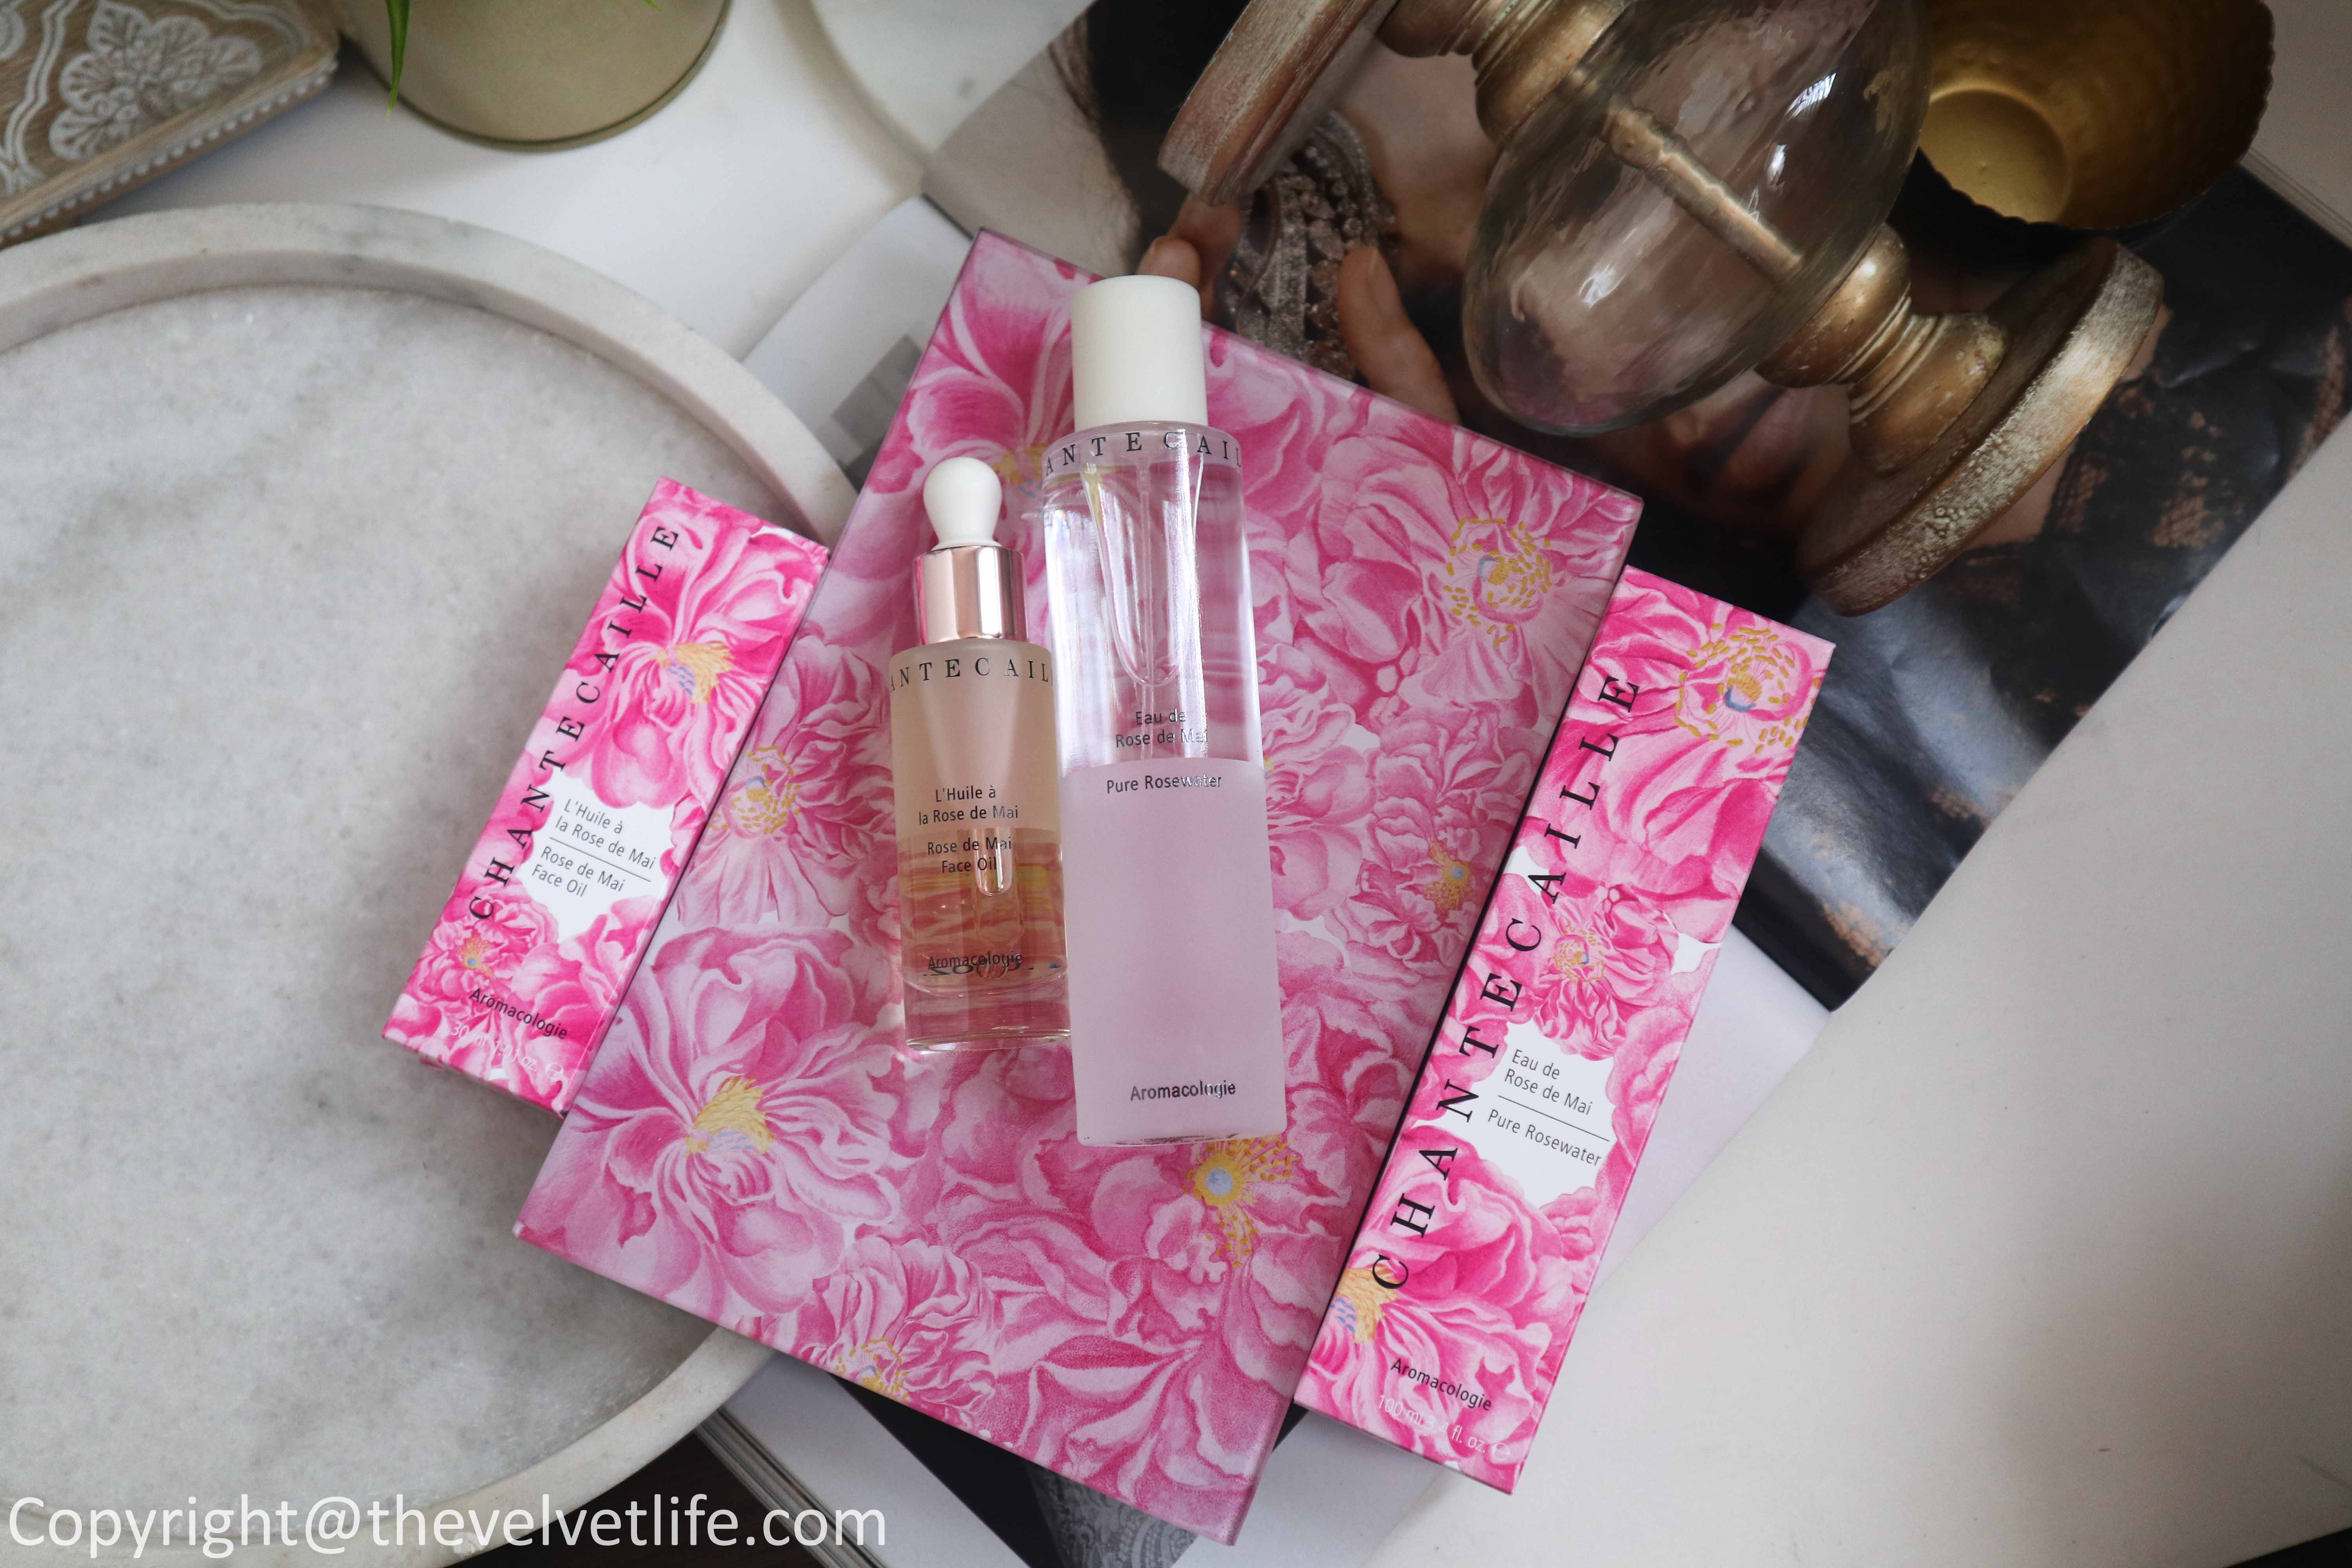 Review of the new John Derian x Chantecaille Rose de Mai Harvest Set which includes Pure rosewater, Rose de Mai face oil, Rose de mai harvest tray